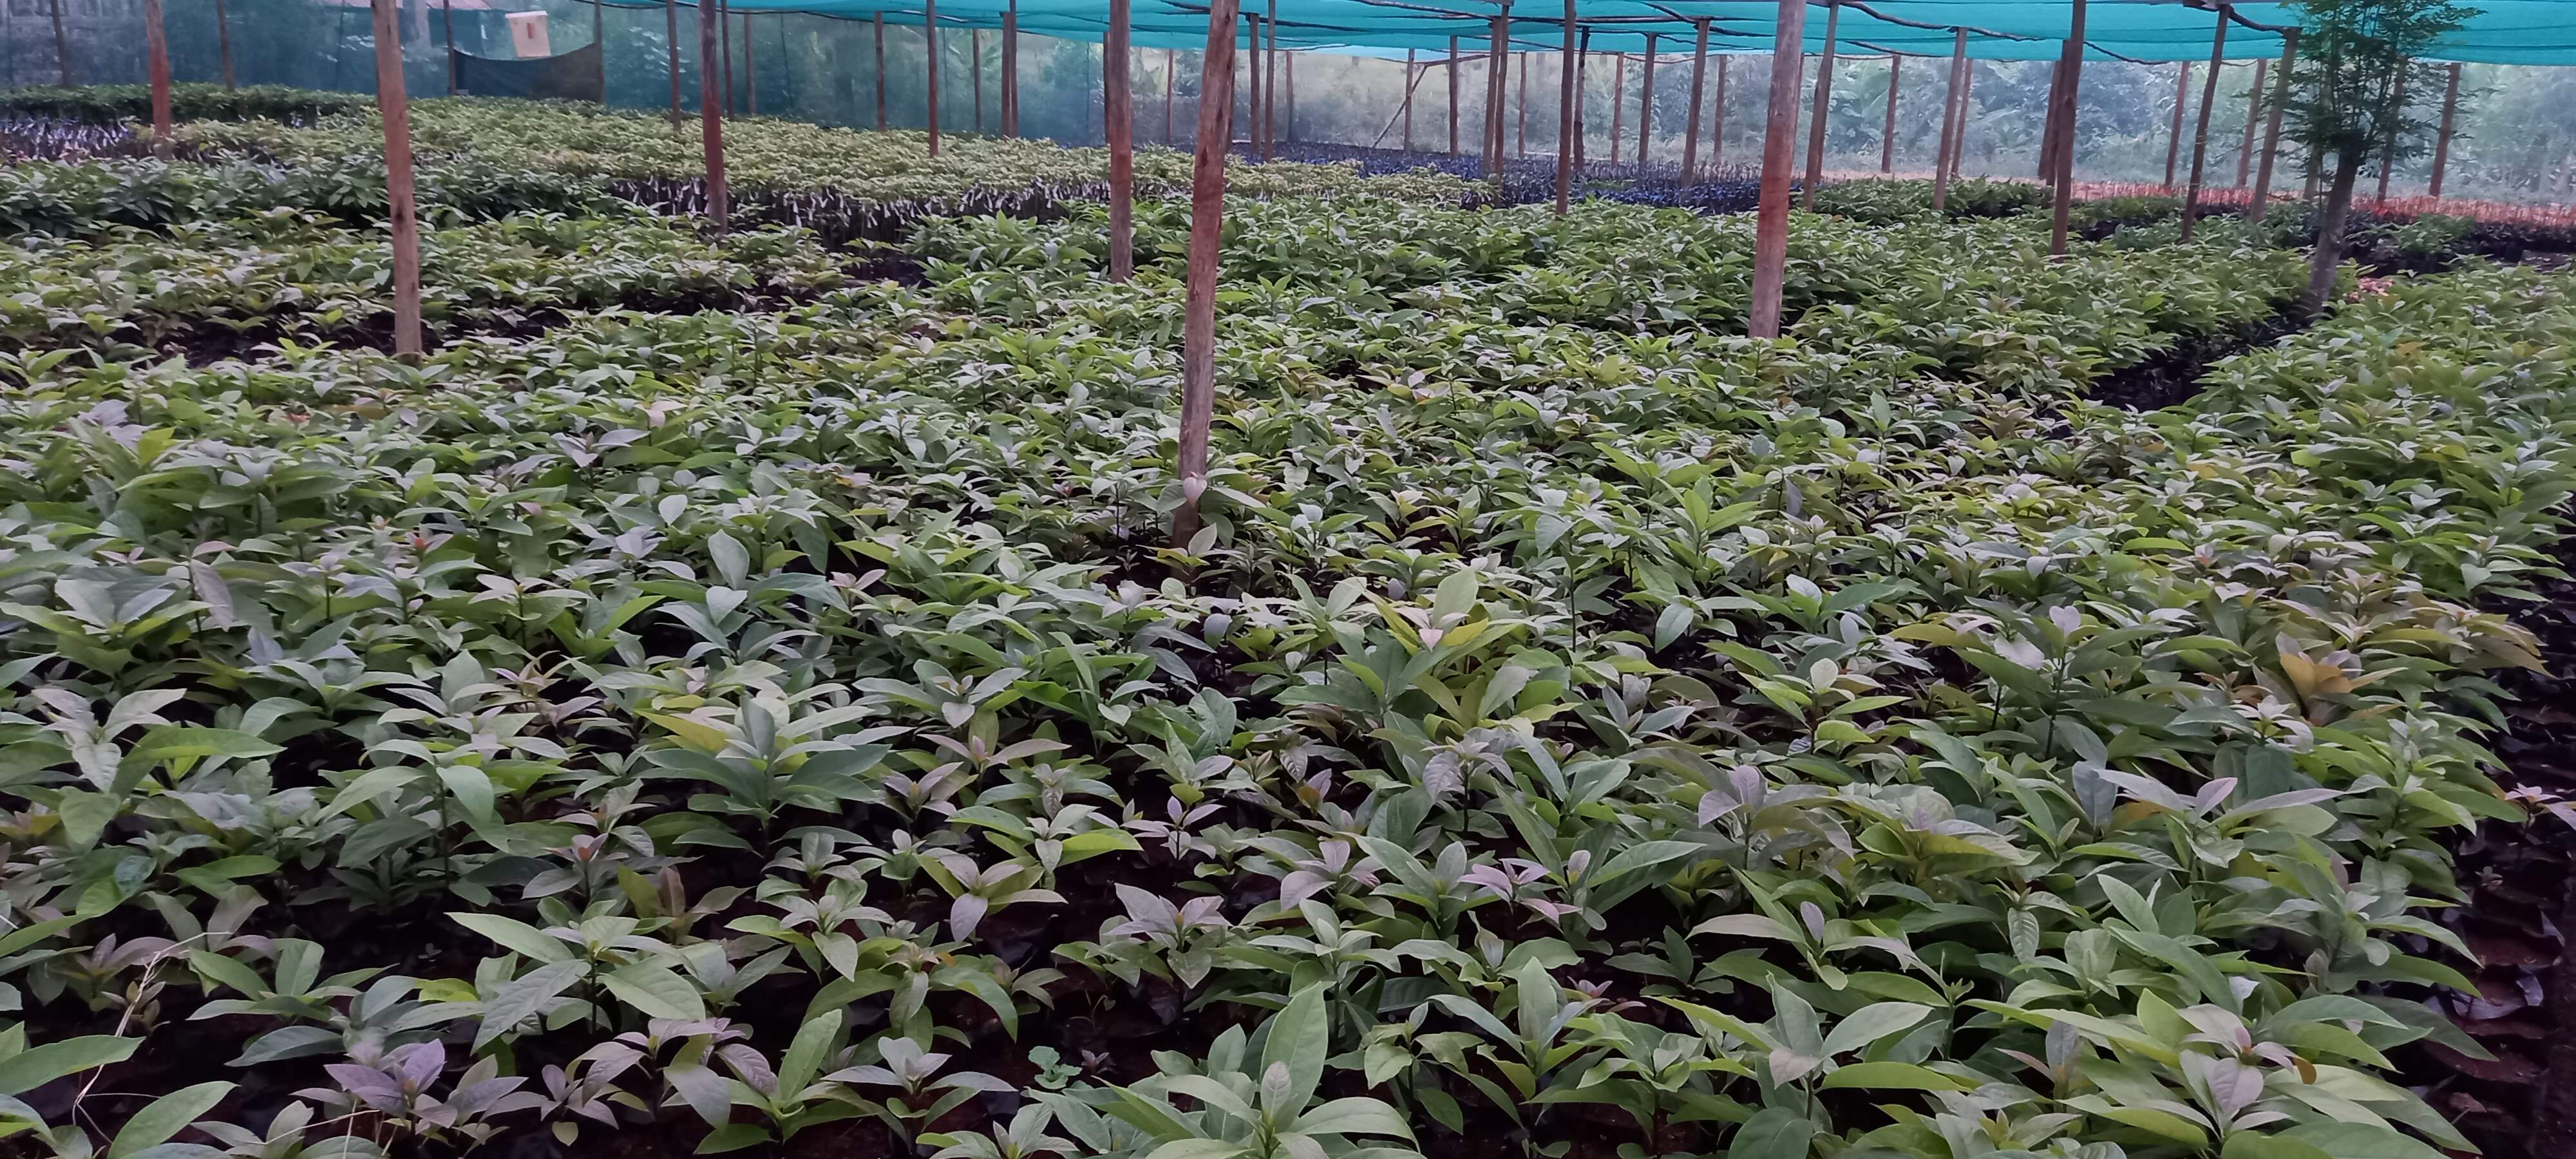 Our Nursery with a holding capacity of approx. 50,000 Avocado seedlings